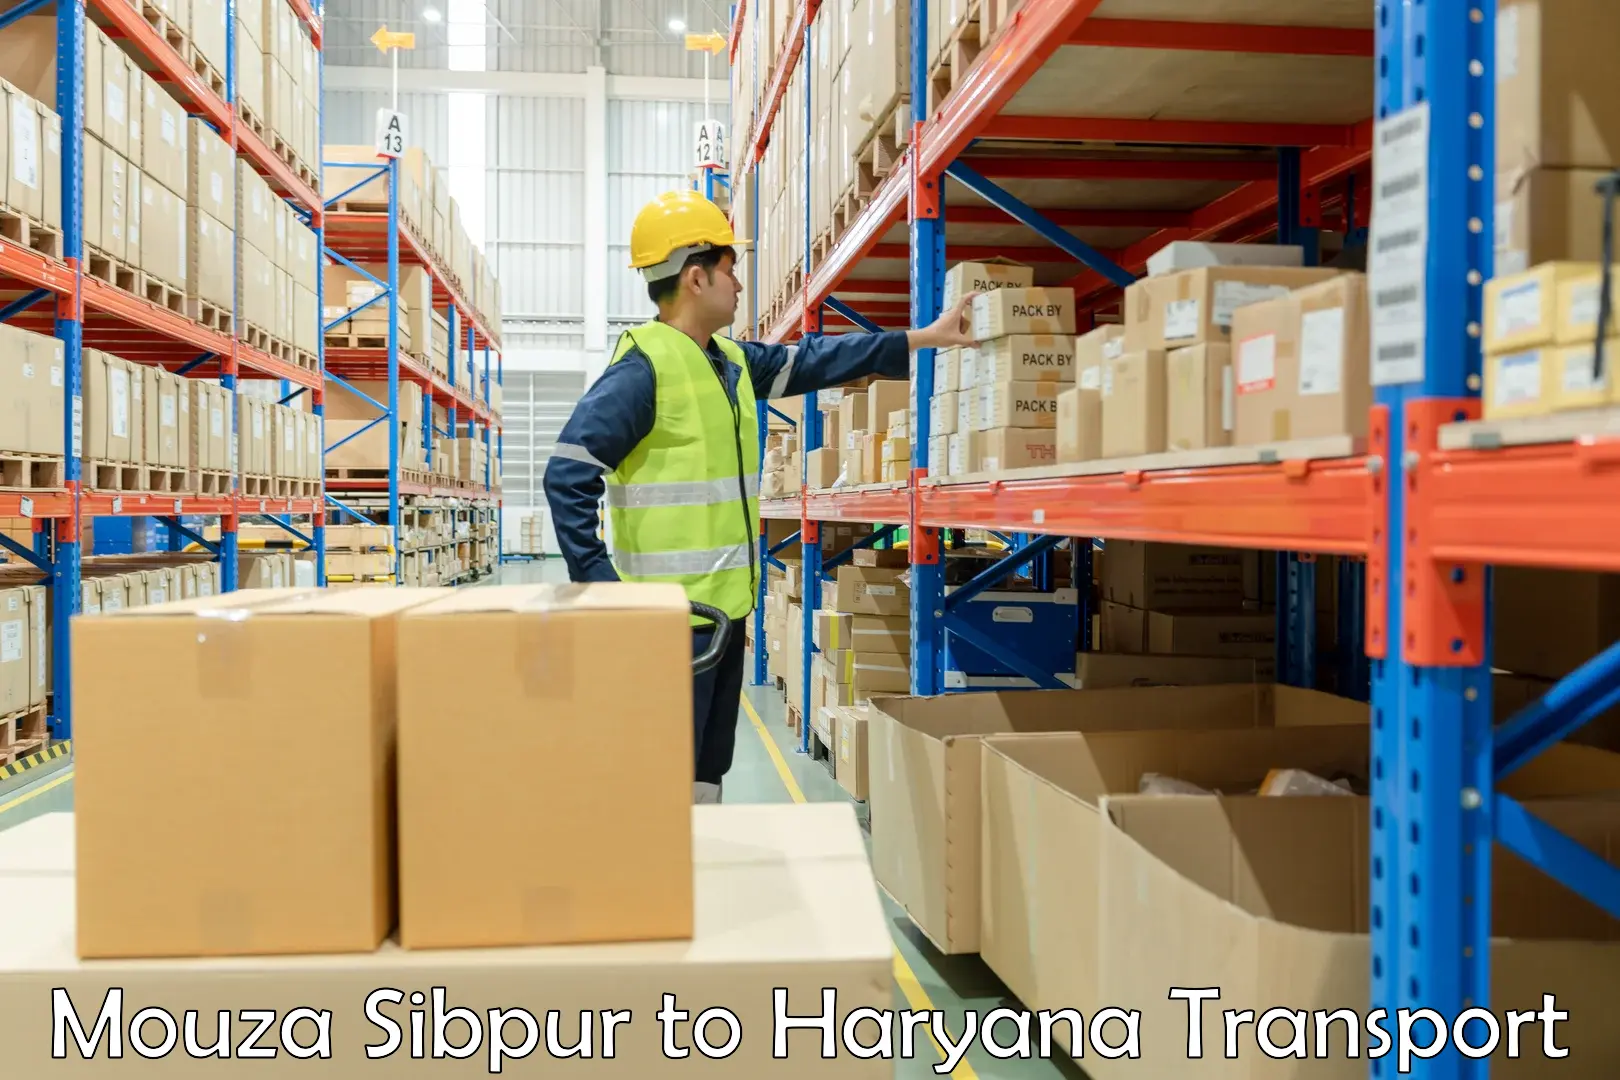 Delivery service Mouza Sibpur to Haryana